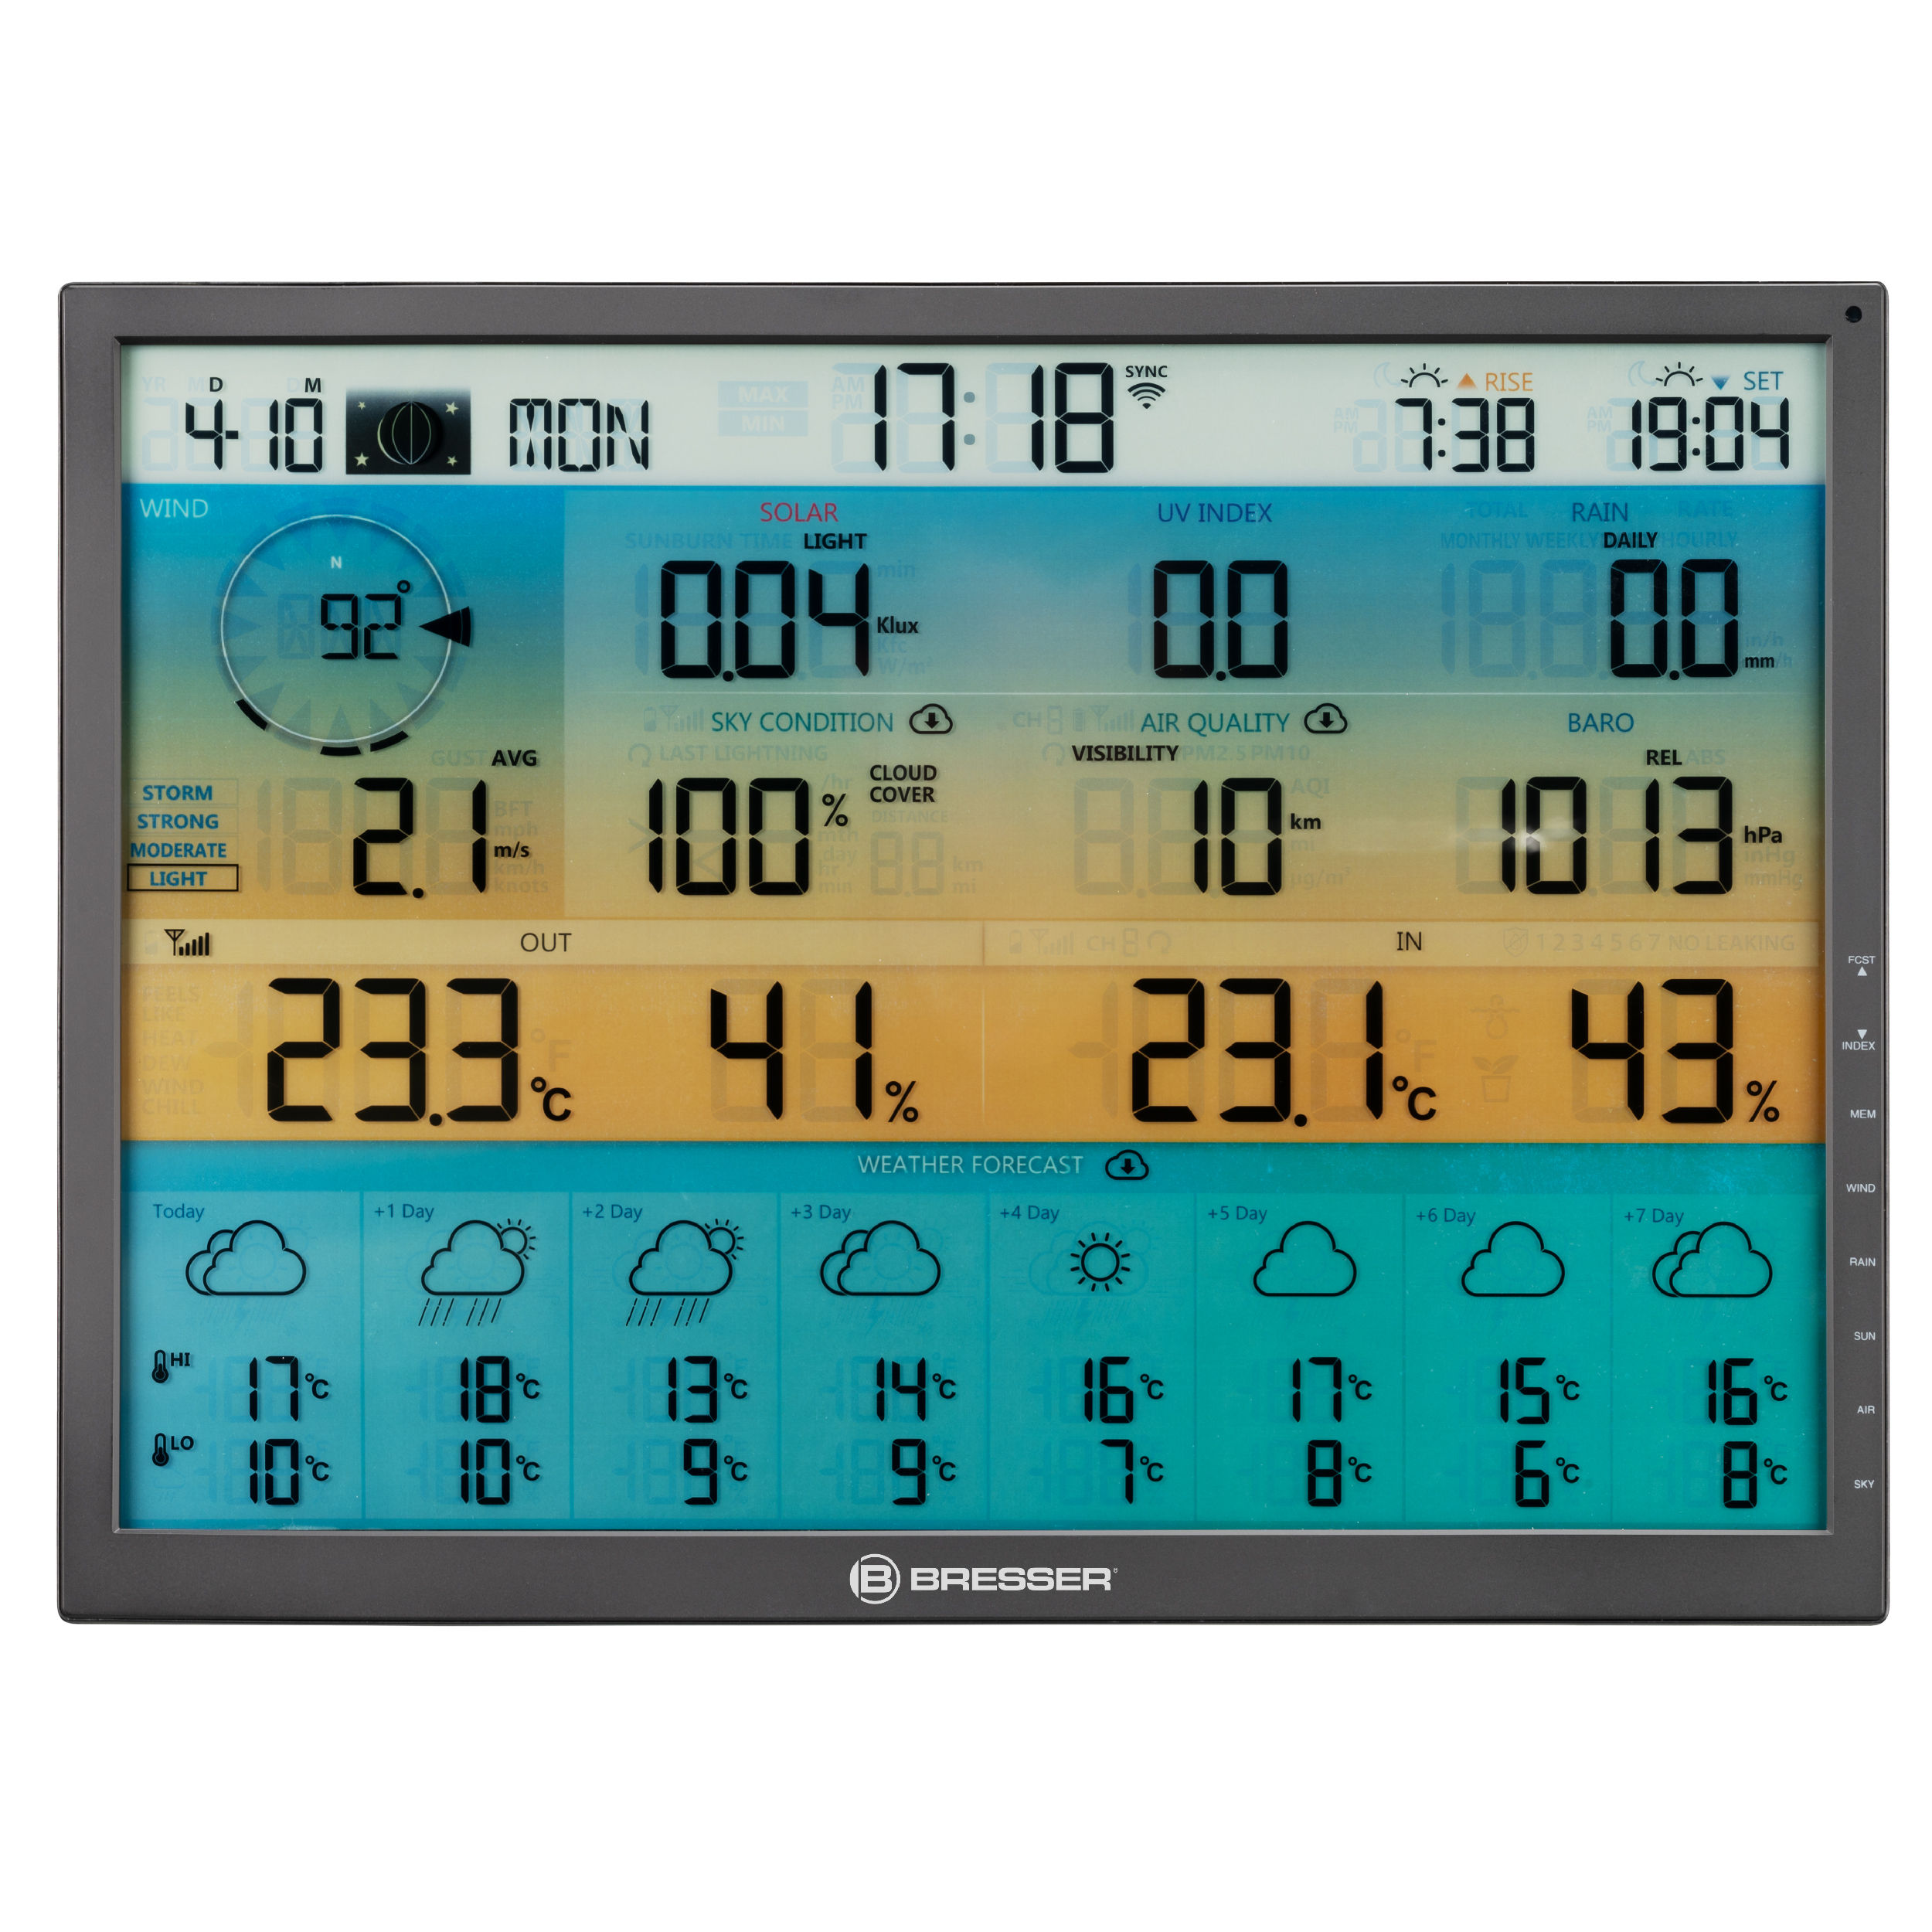 BRESSER Additional / Replacement Base Station for the 7003230 8-Day 4CAST XL Wi-Fi Weather Station